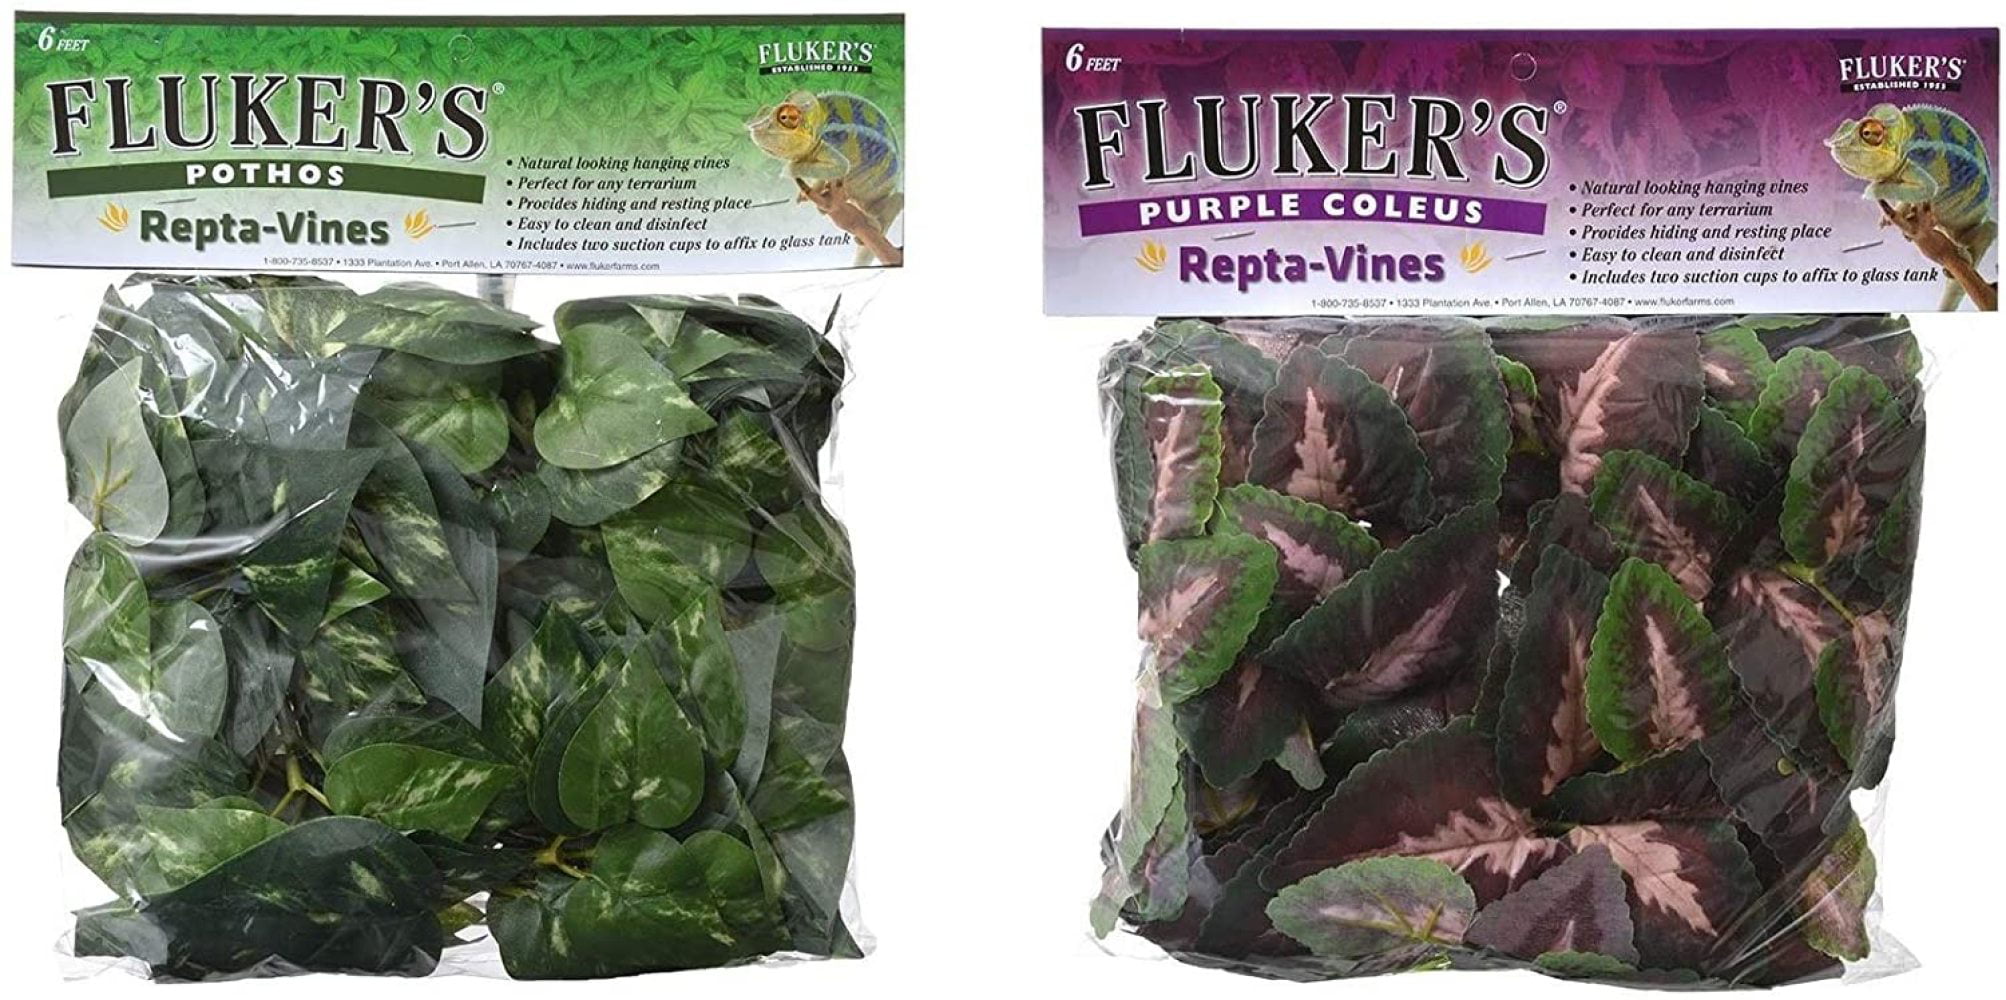 Flukers Repta Vines-Pothos for Reptiles and Amphibians 2-Pack 